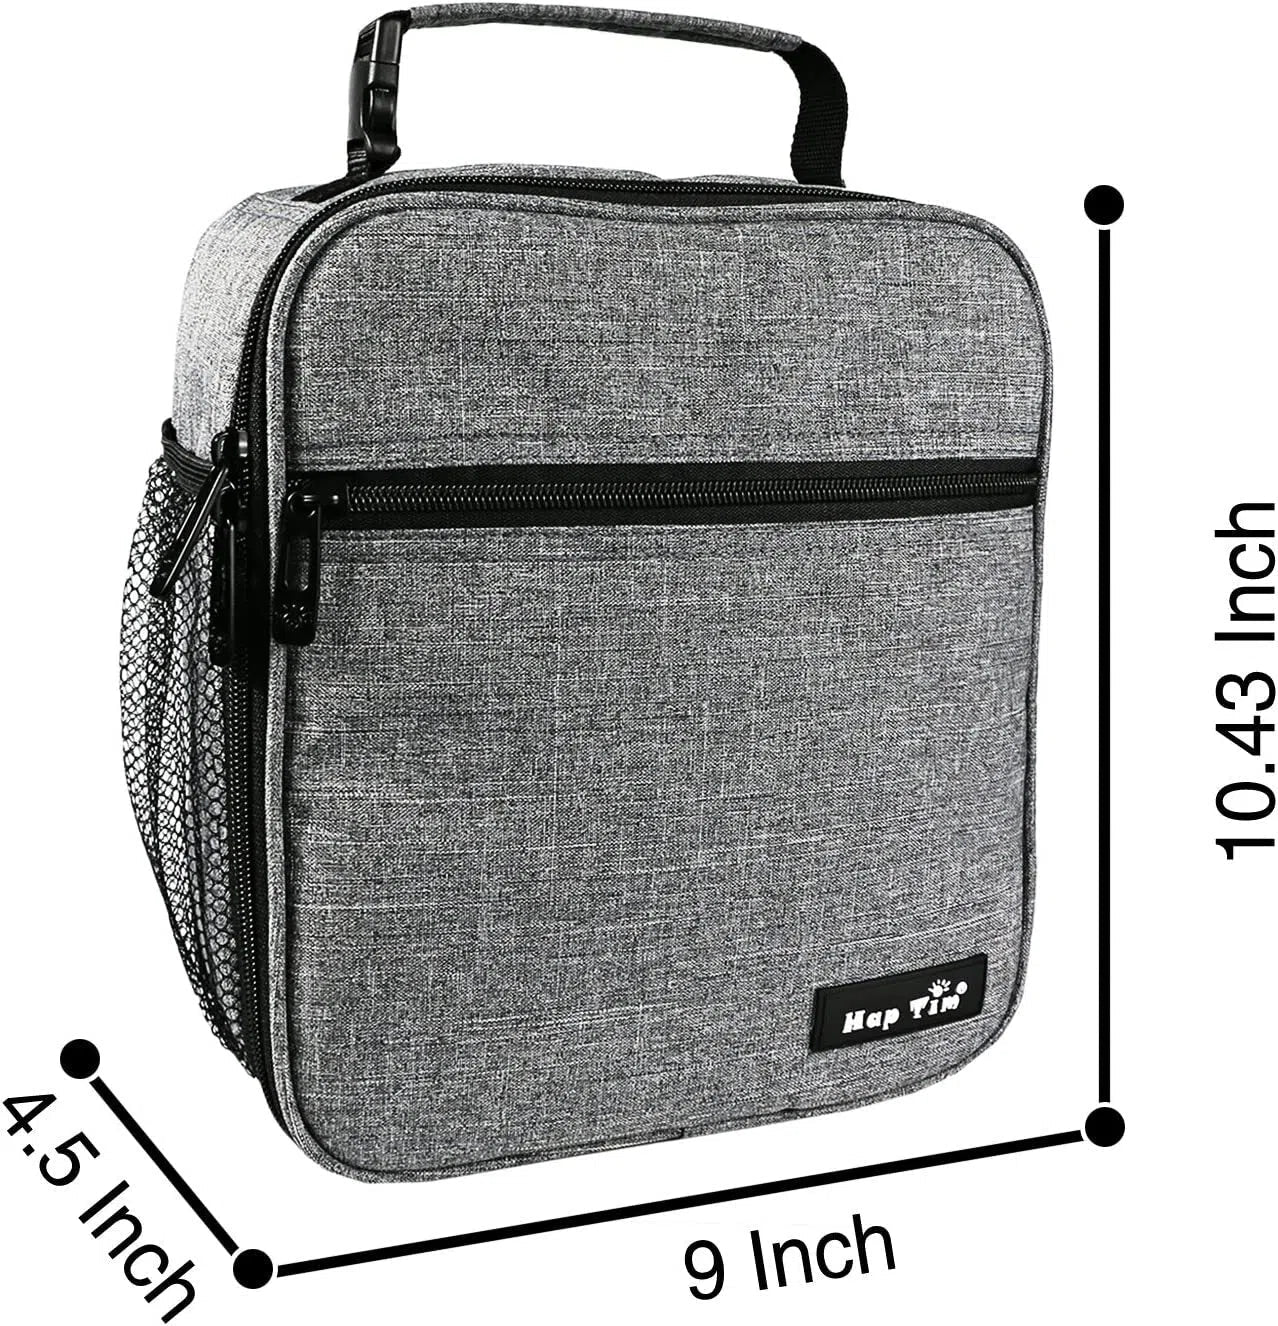 Insulated Lunch Box for Men/Women/Kids/Boys/Girls/Adults, Reusable Lunch Bag, Tough & Spacious Adult Lunchbox (18654-G)